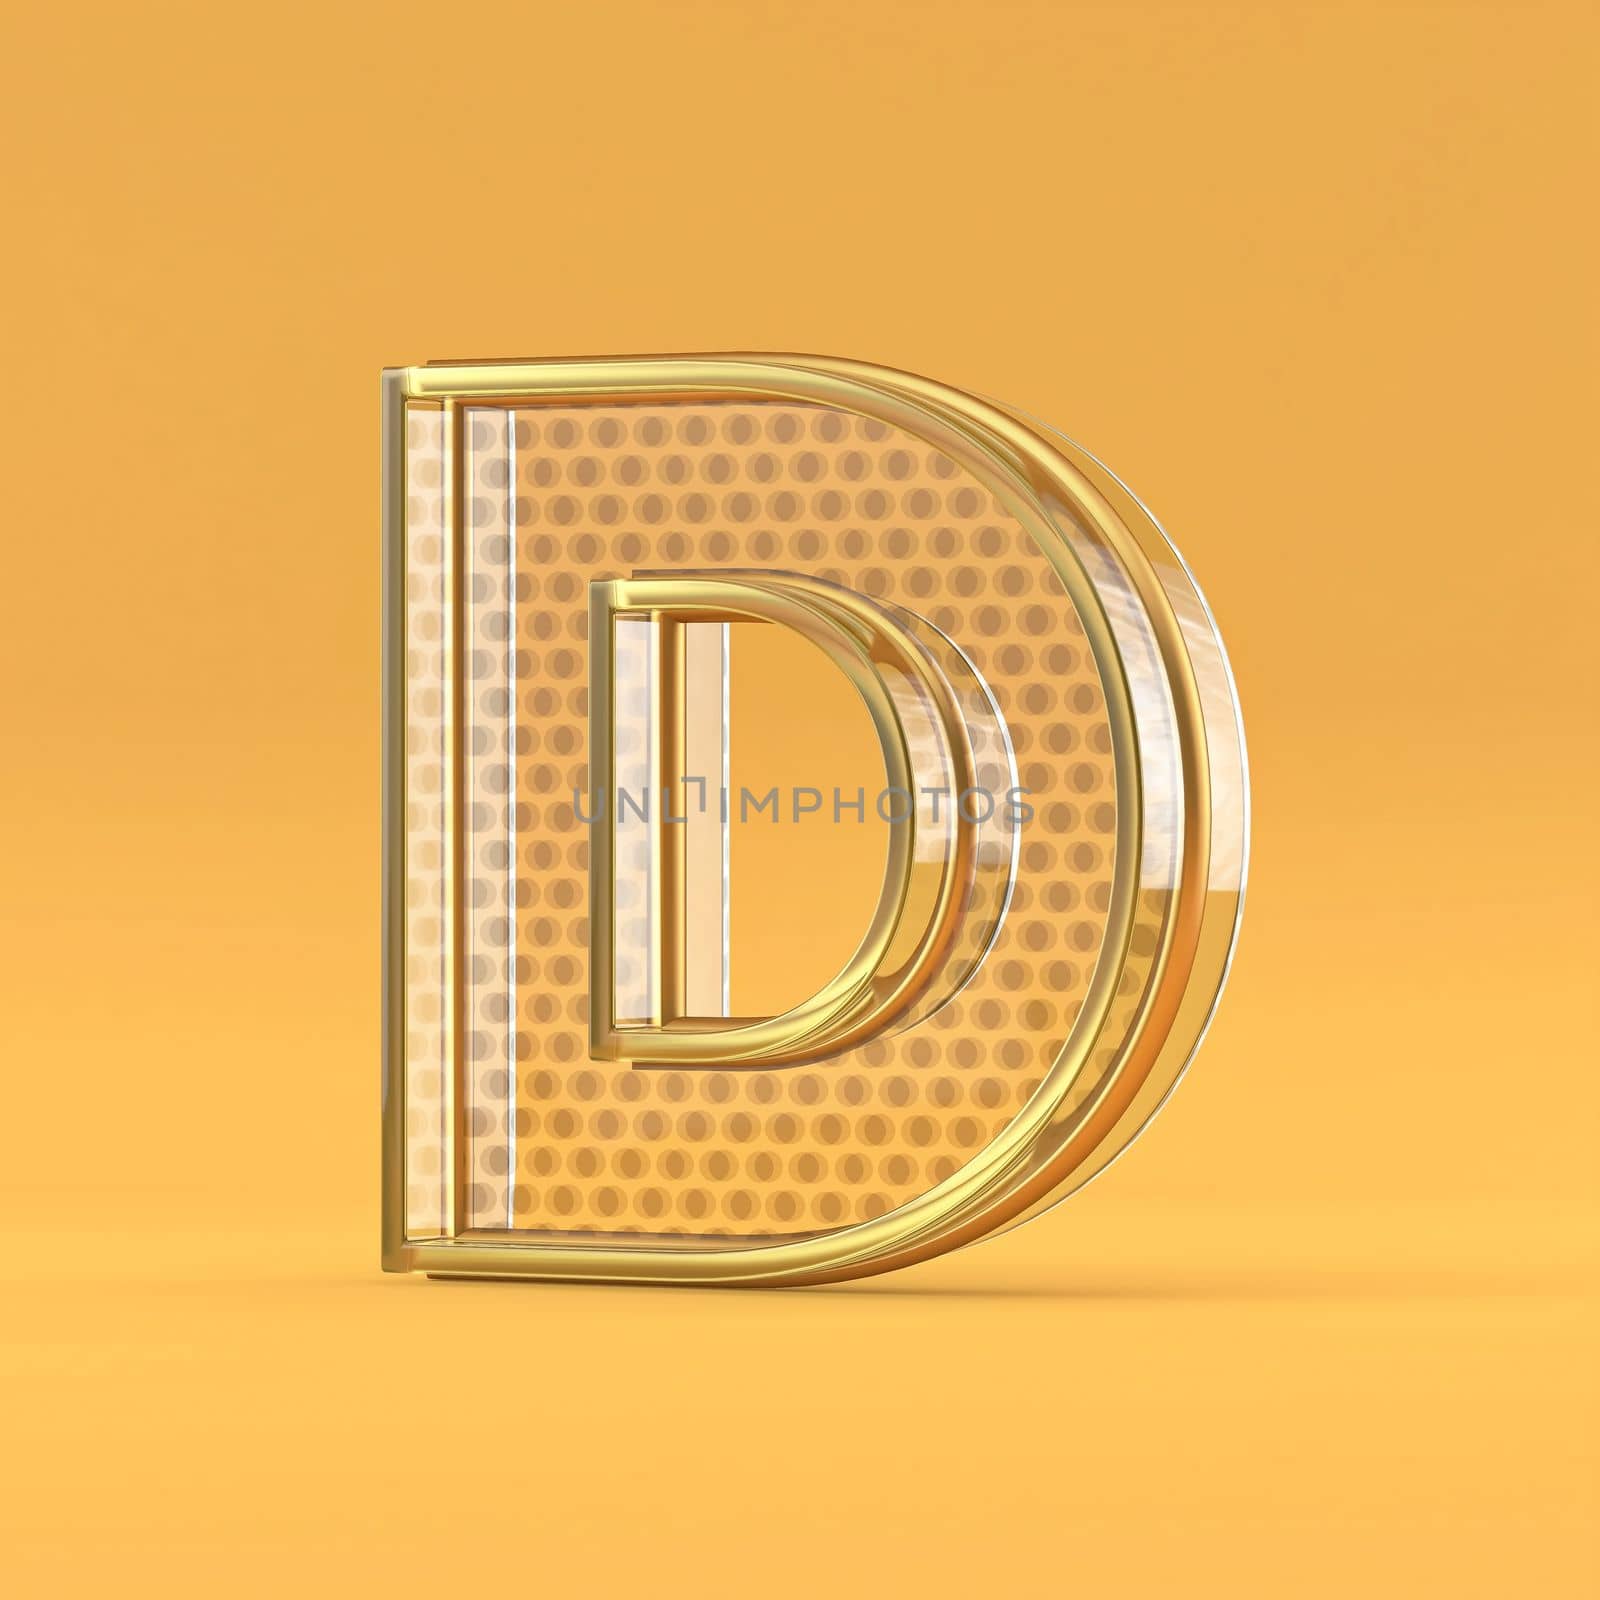 Gold wire and glass font letter D 3D rendering illustration isolated on orange background